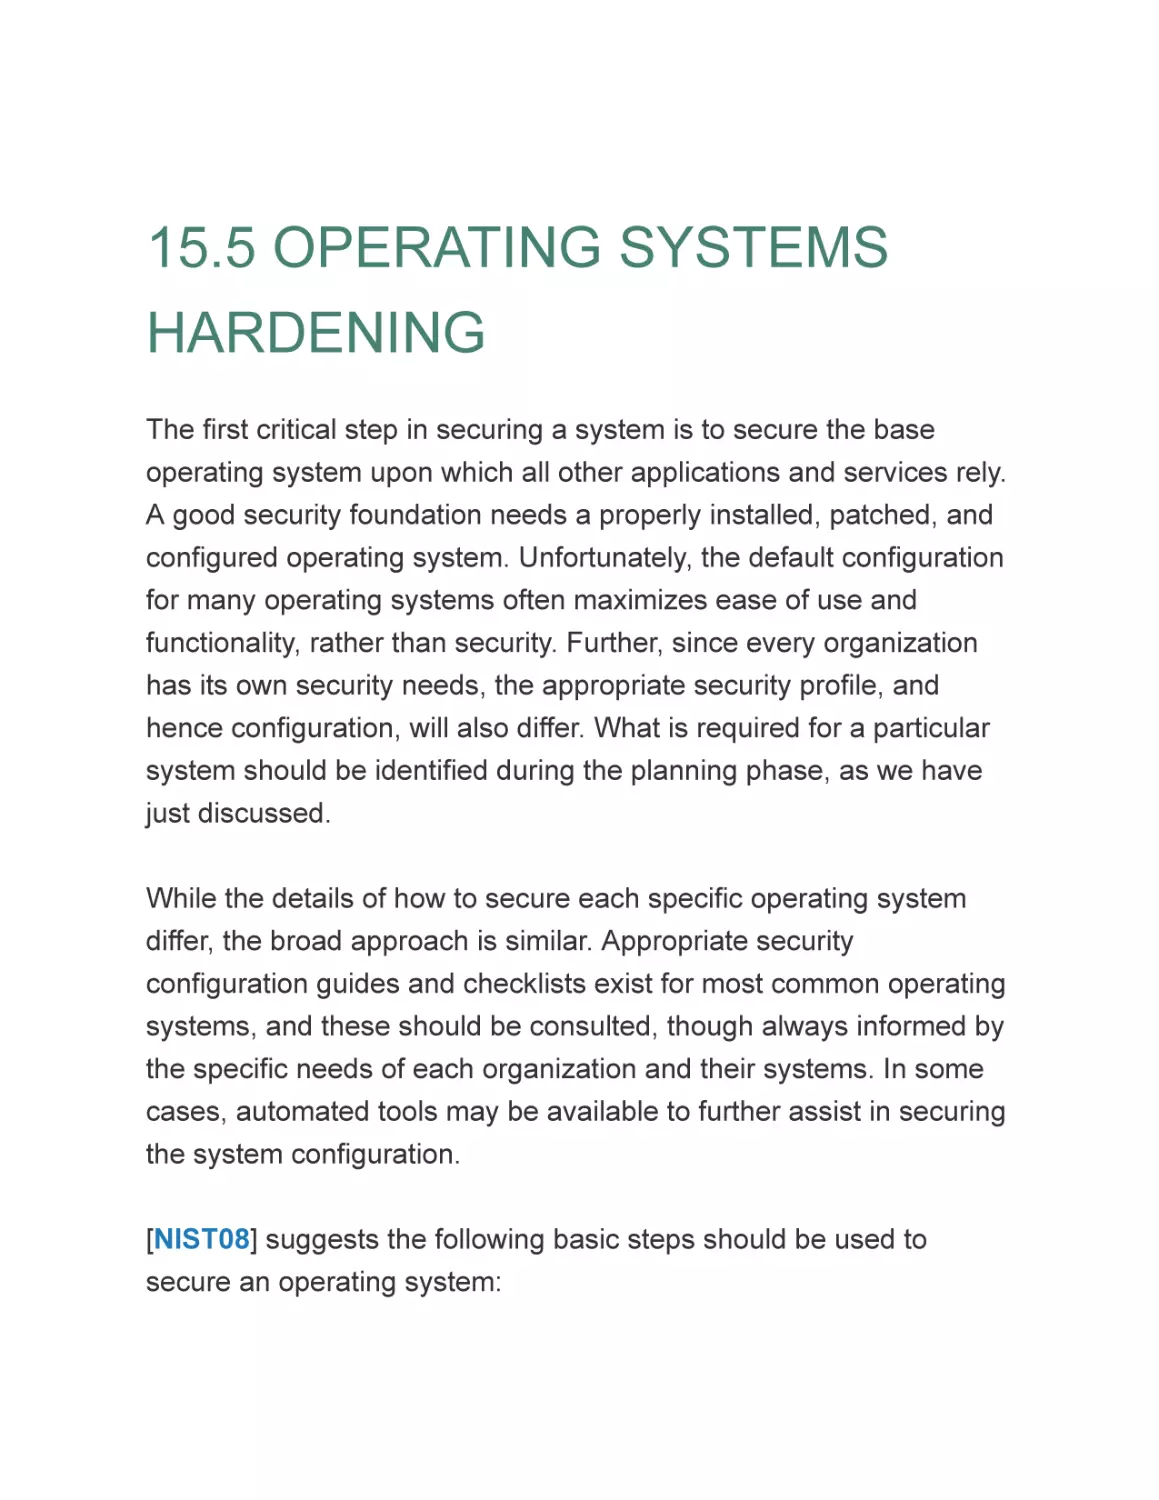 15.5 OPERATING SYSTEMS HARDENING